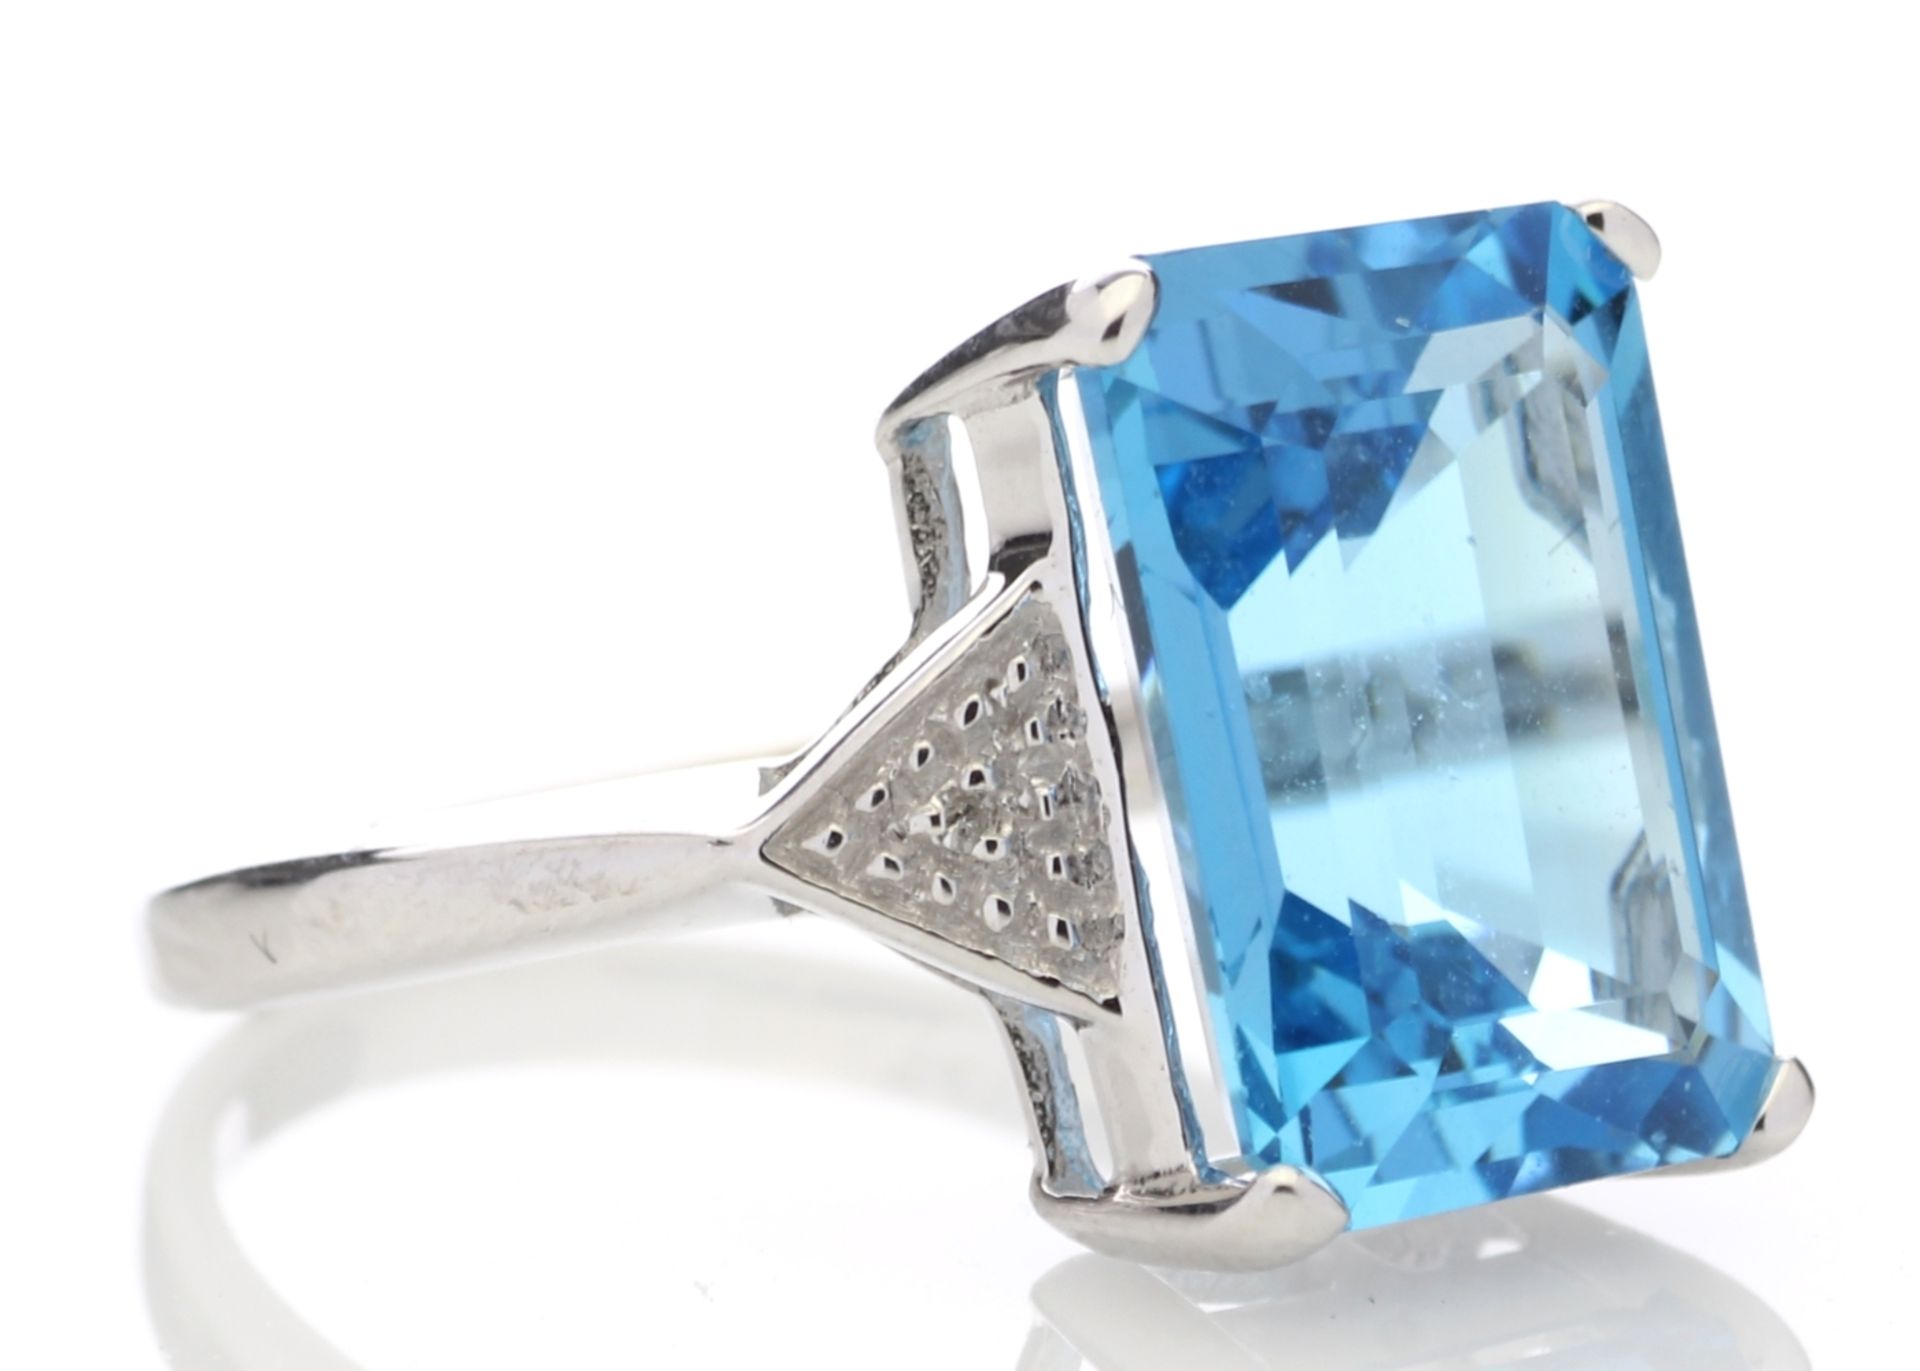 9ct White Gold Diamond And Blue Topaz Ring 0.01 Carats - Valued by GIE £1,620.00 - This stunning - Image 4 of 7